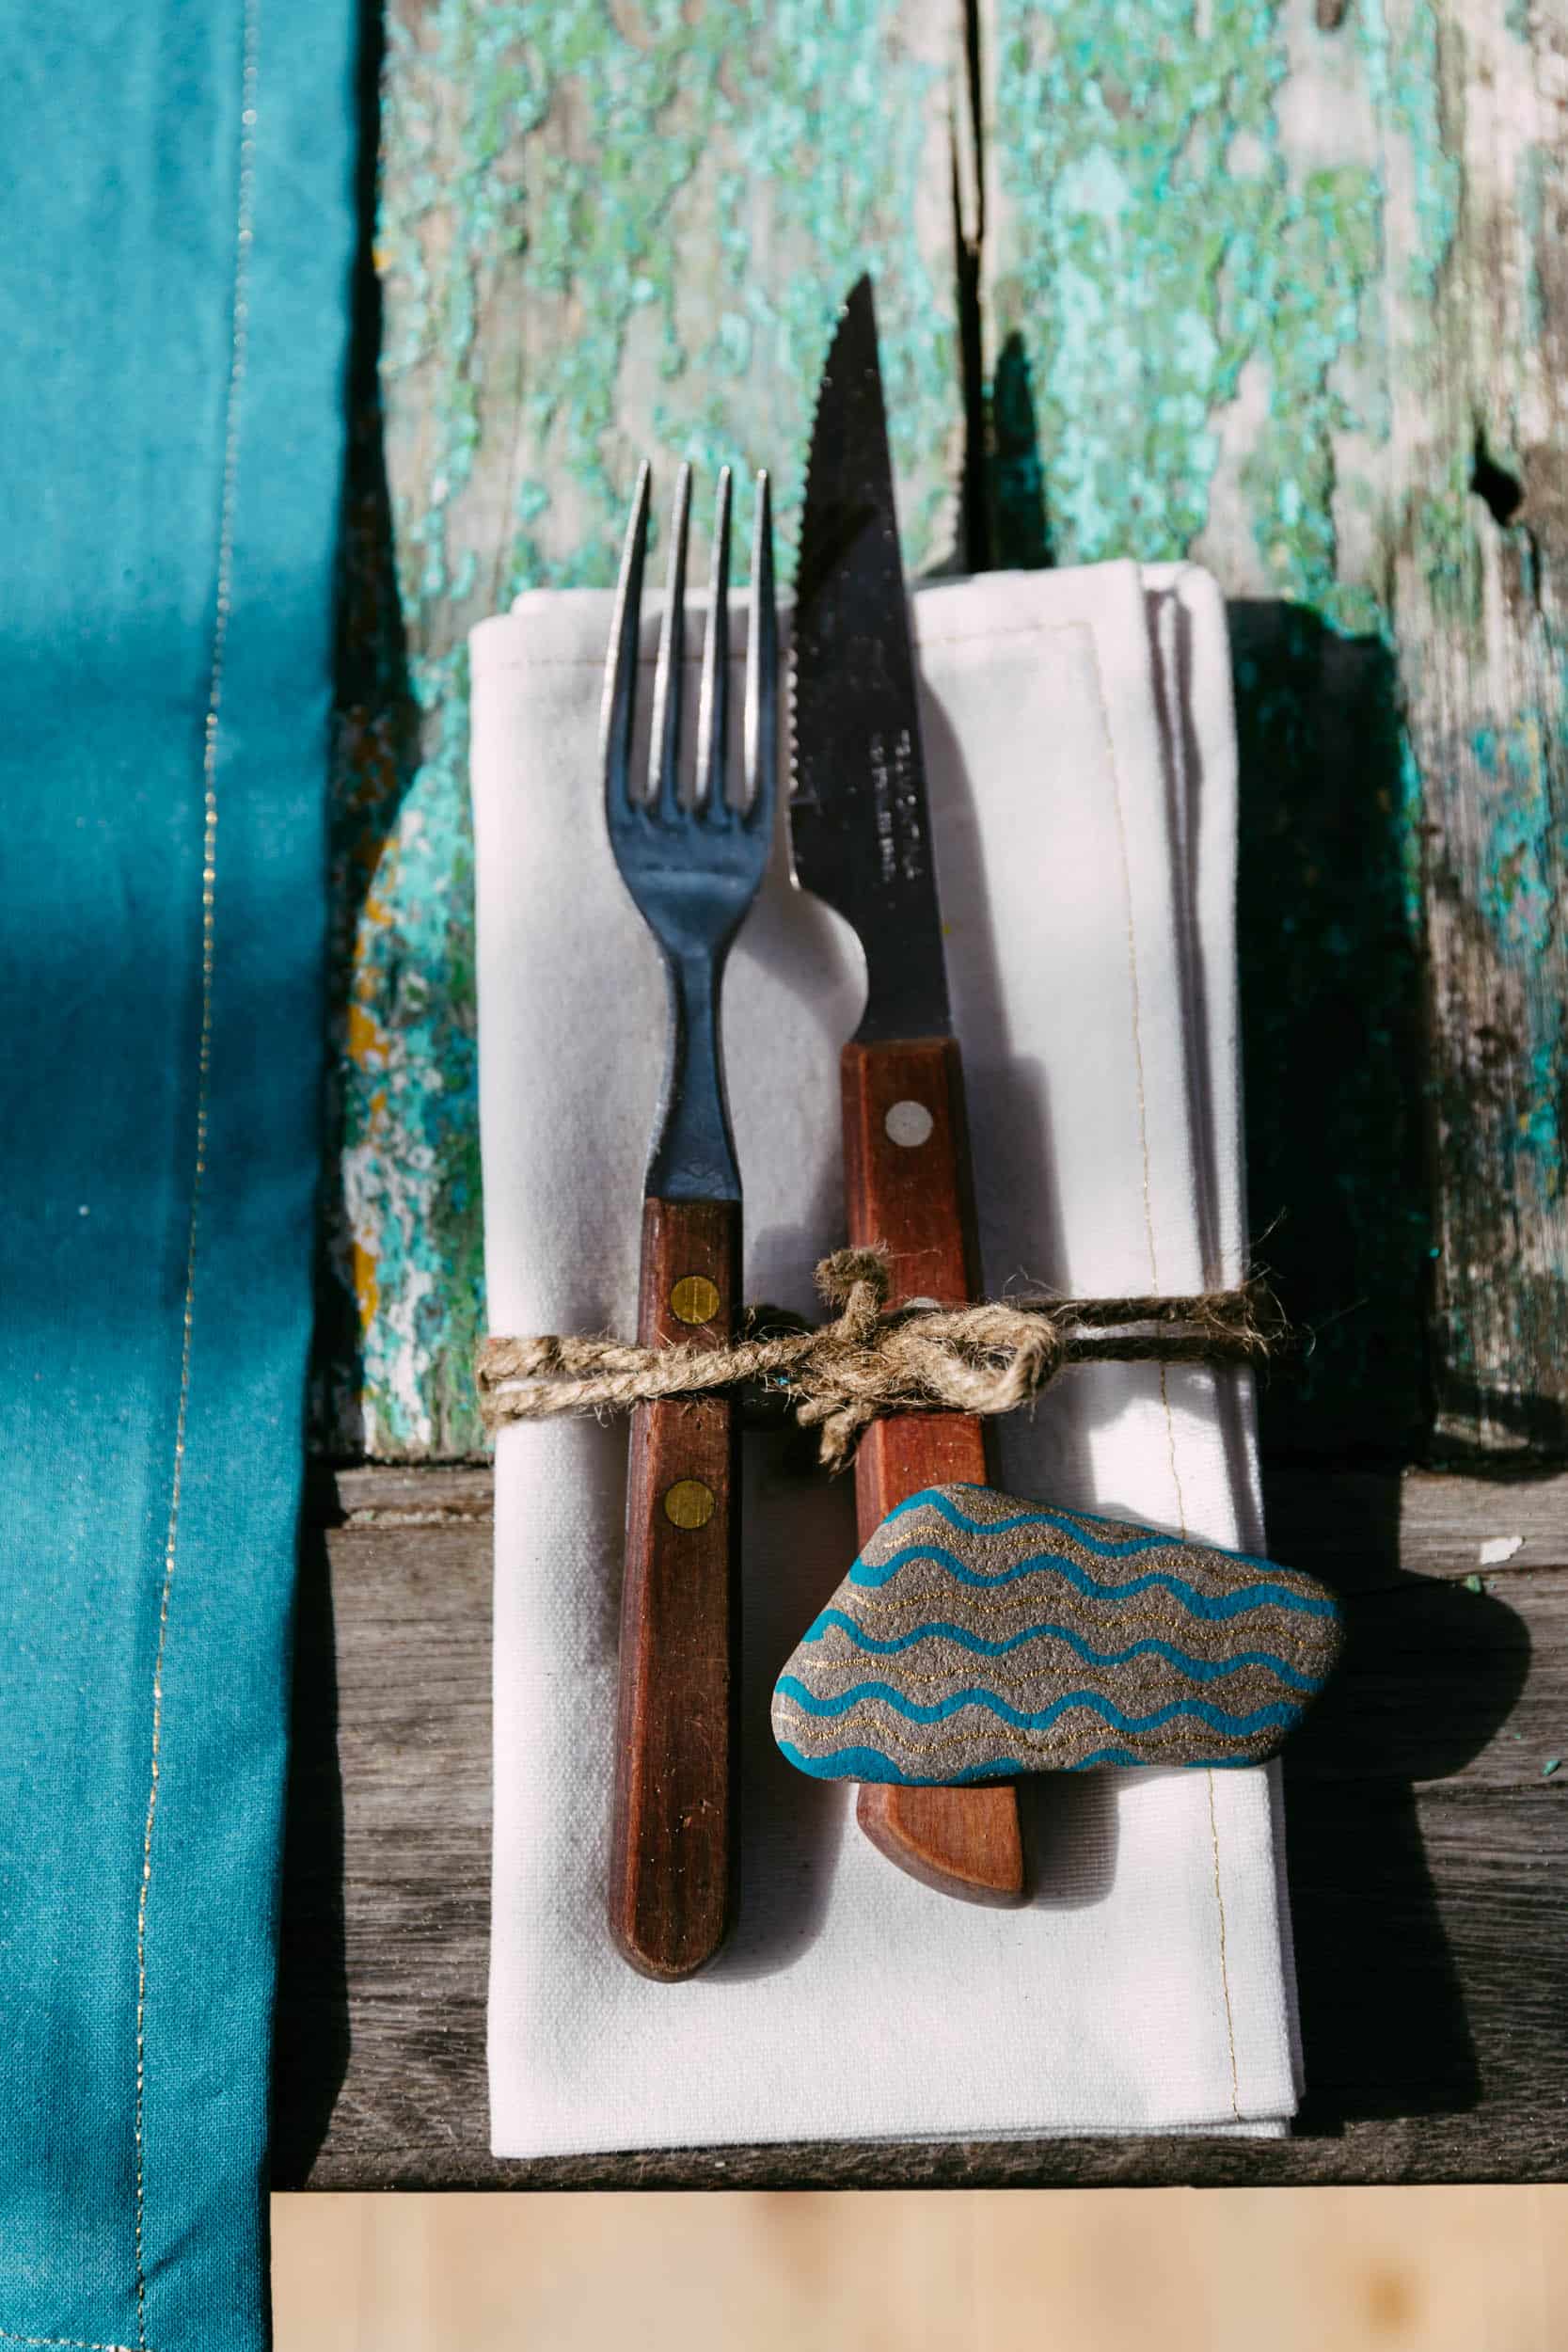 A beach-themed napkin with a fork and knife on top, designed with elements of the coast.